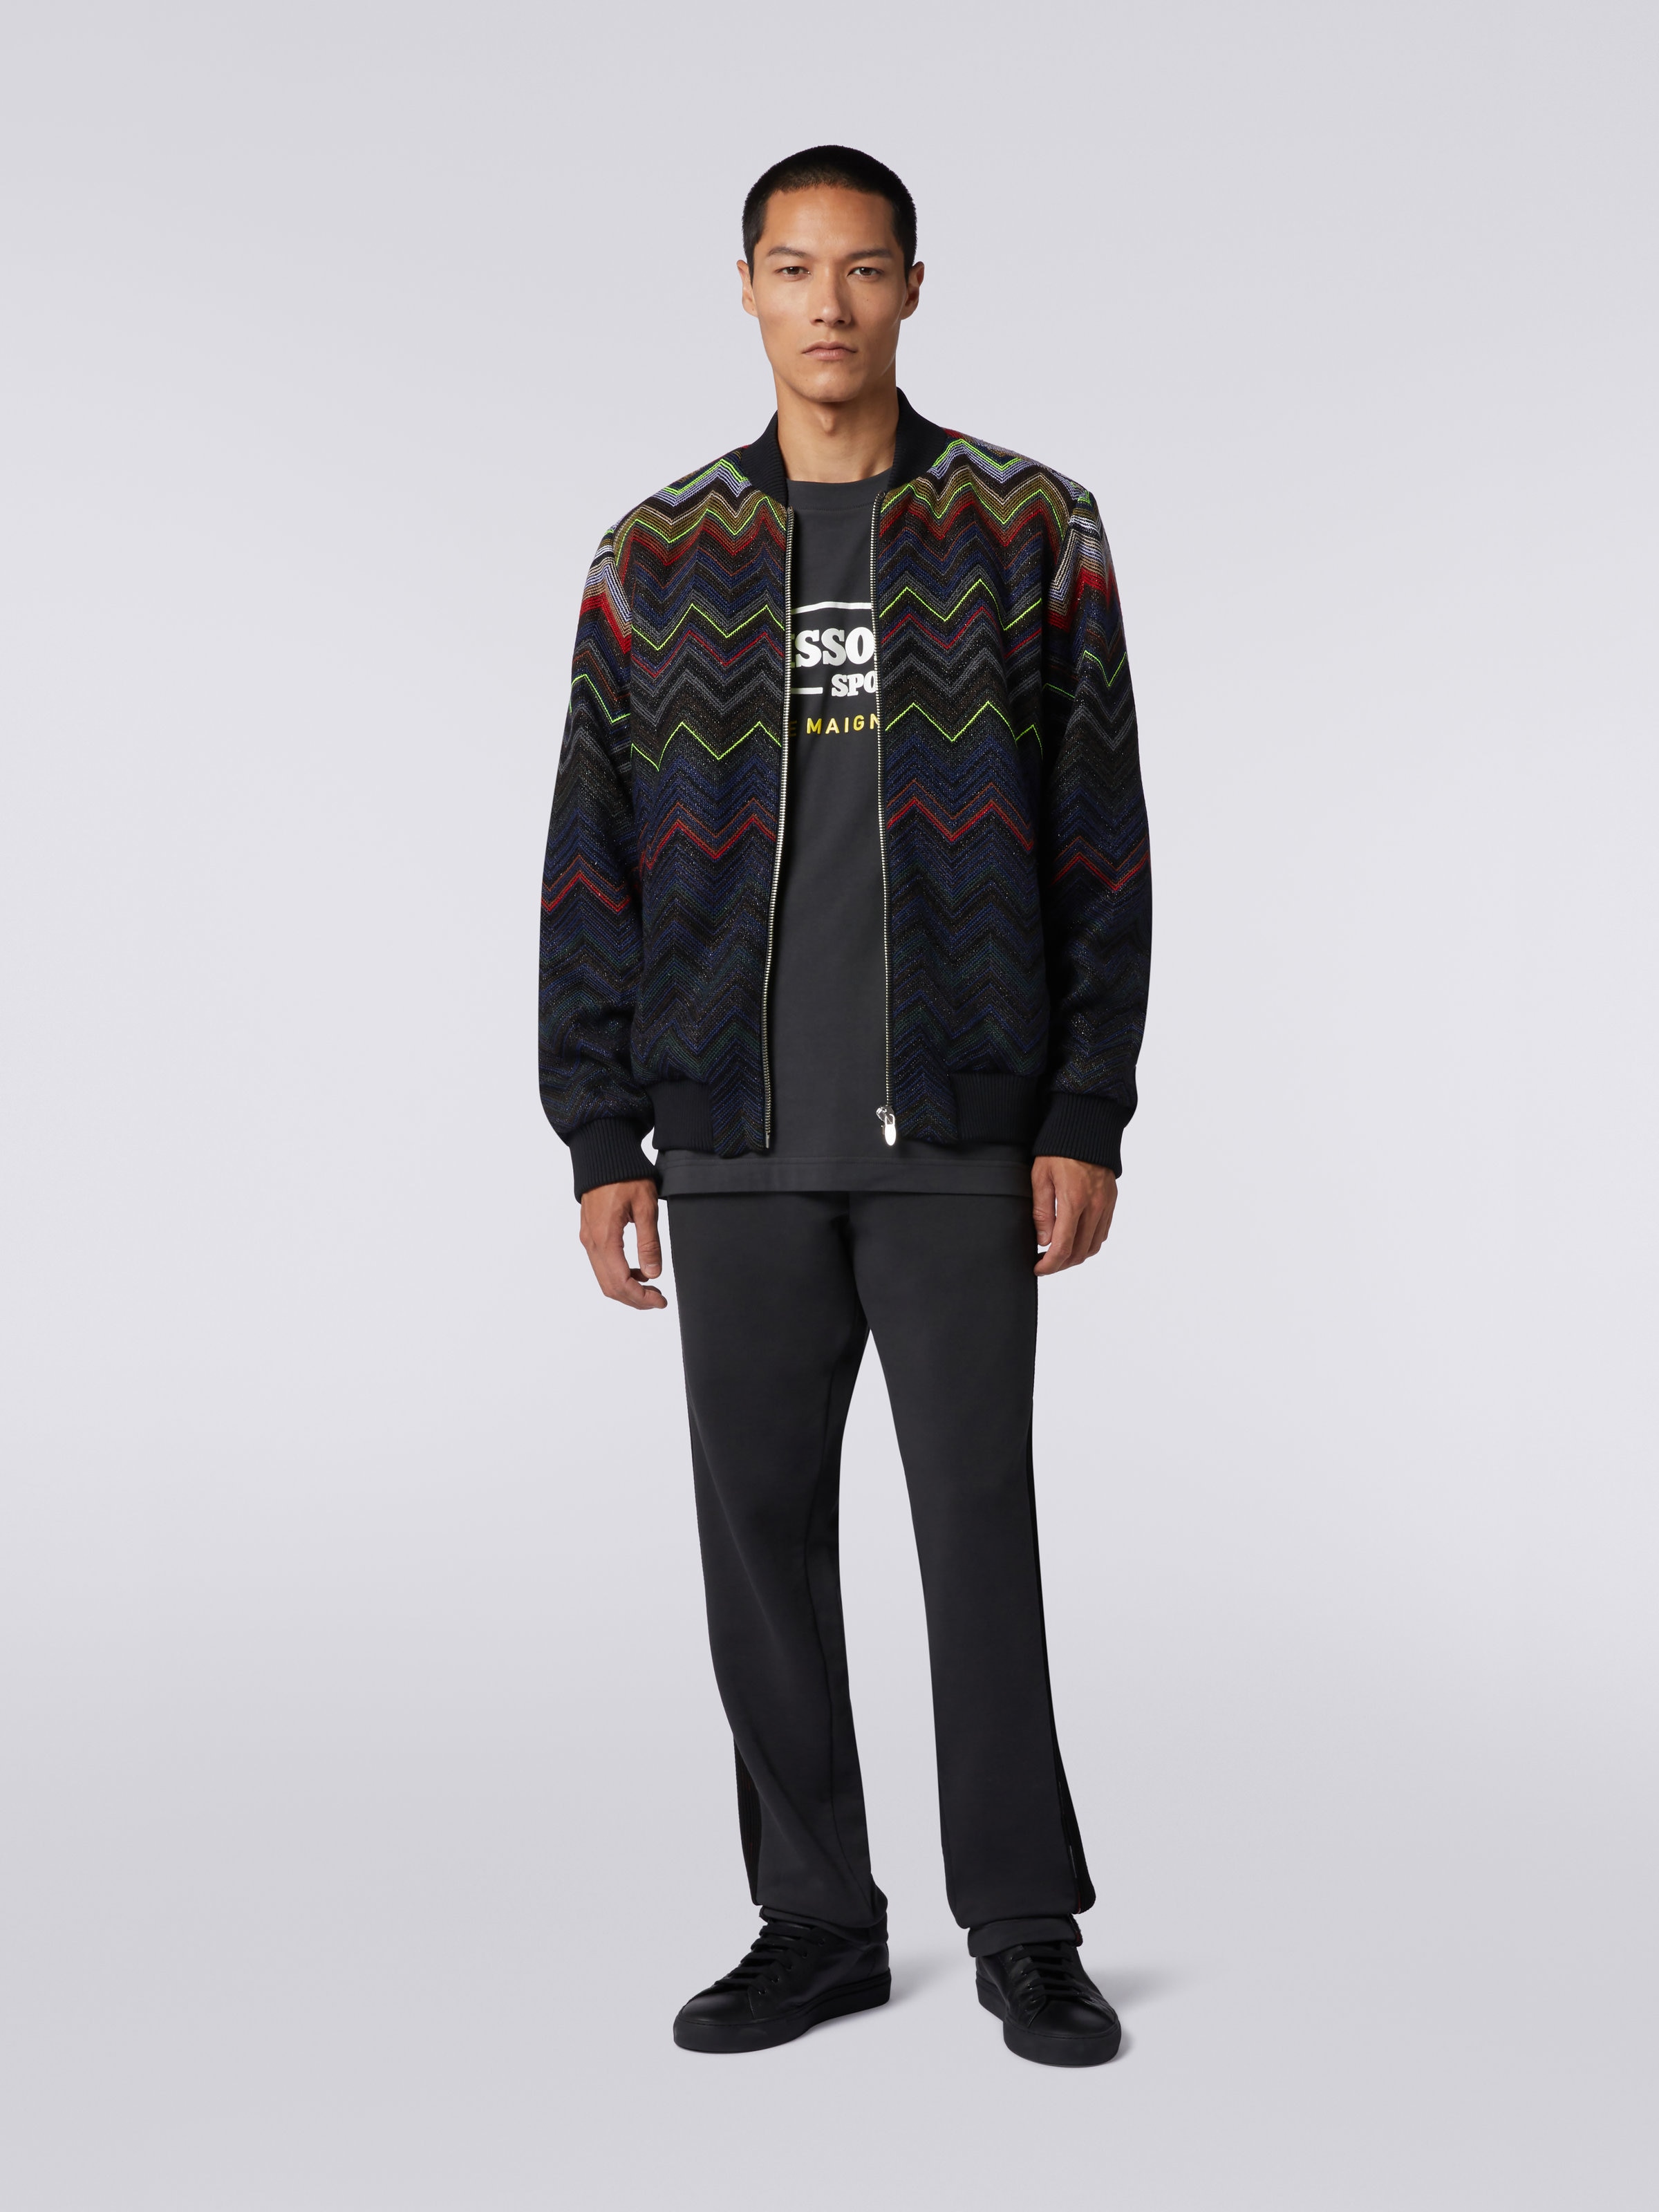 Wool and cotton blend chevron bomber jacket in collaboration with Mike Maignan, Multicoloured - 1